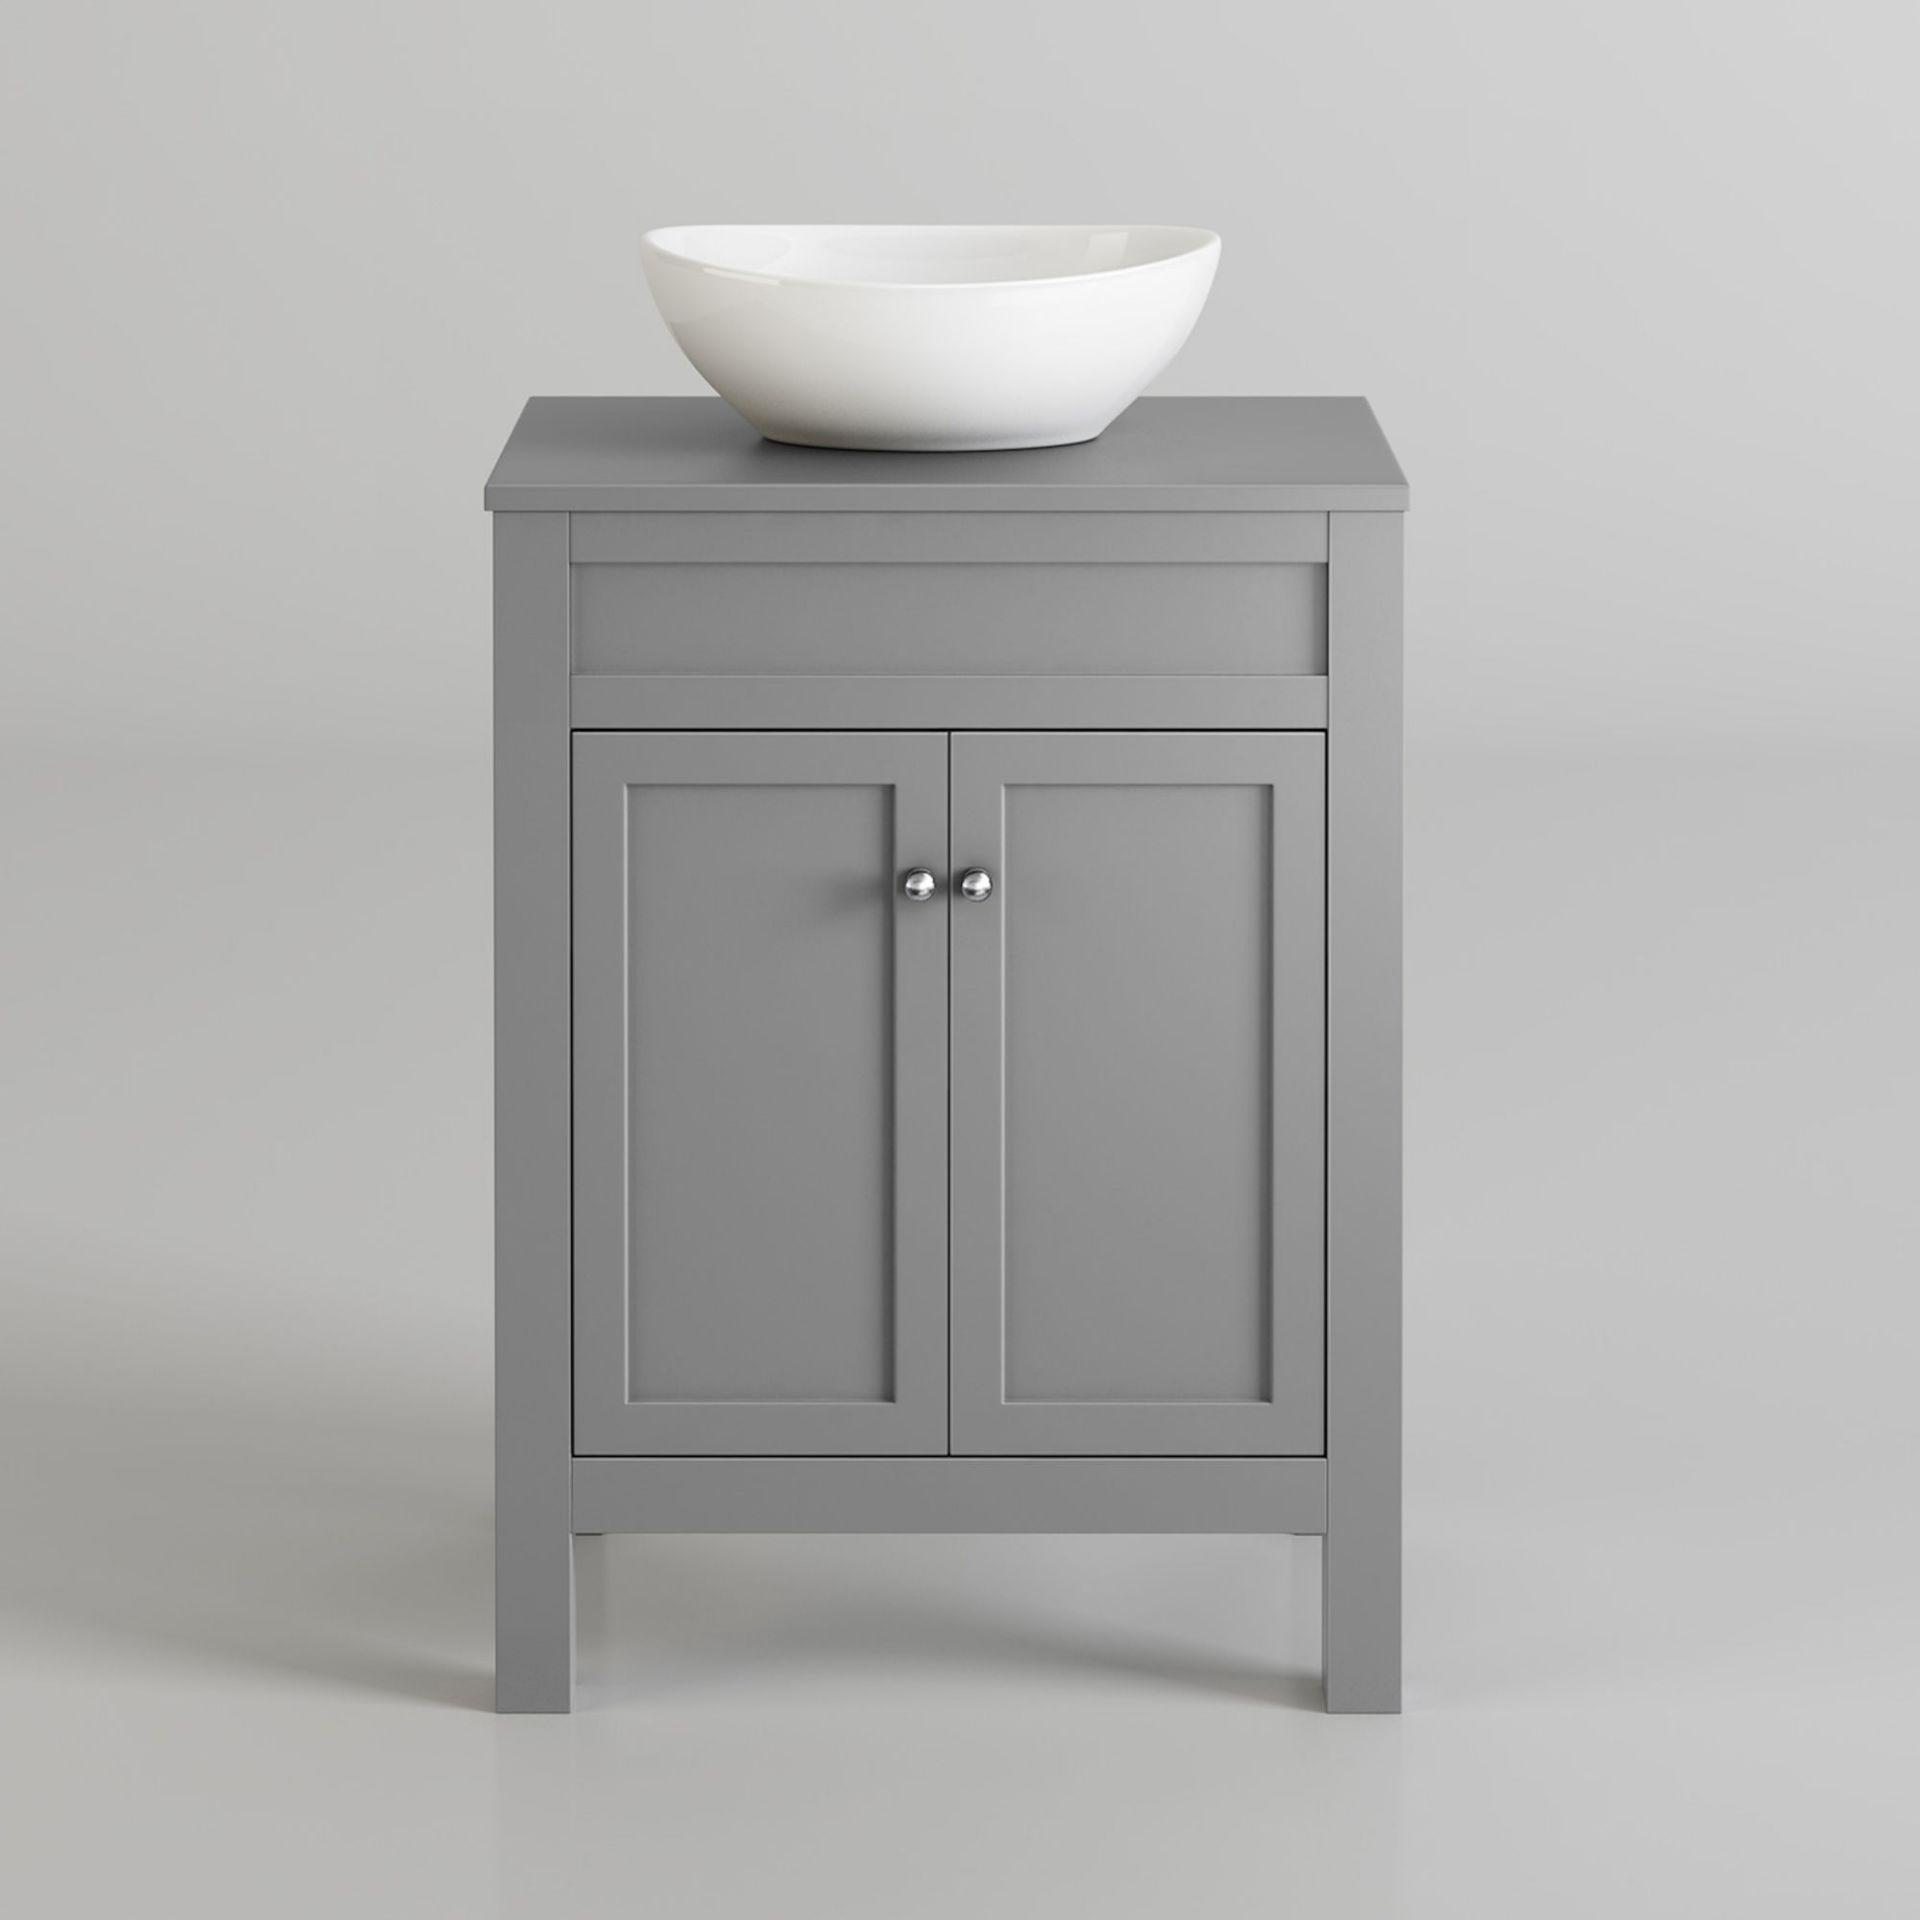 (EY8) 600mm Melbourne Grey Countertop Unit and Camila Basin - Floor Standing. RRP £499.99. Comes - Image 5 of 5